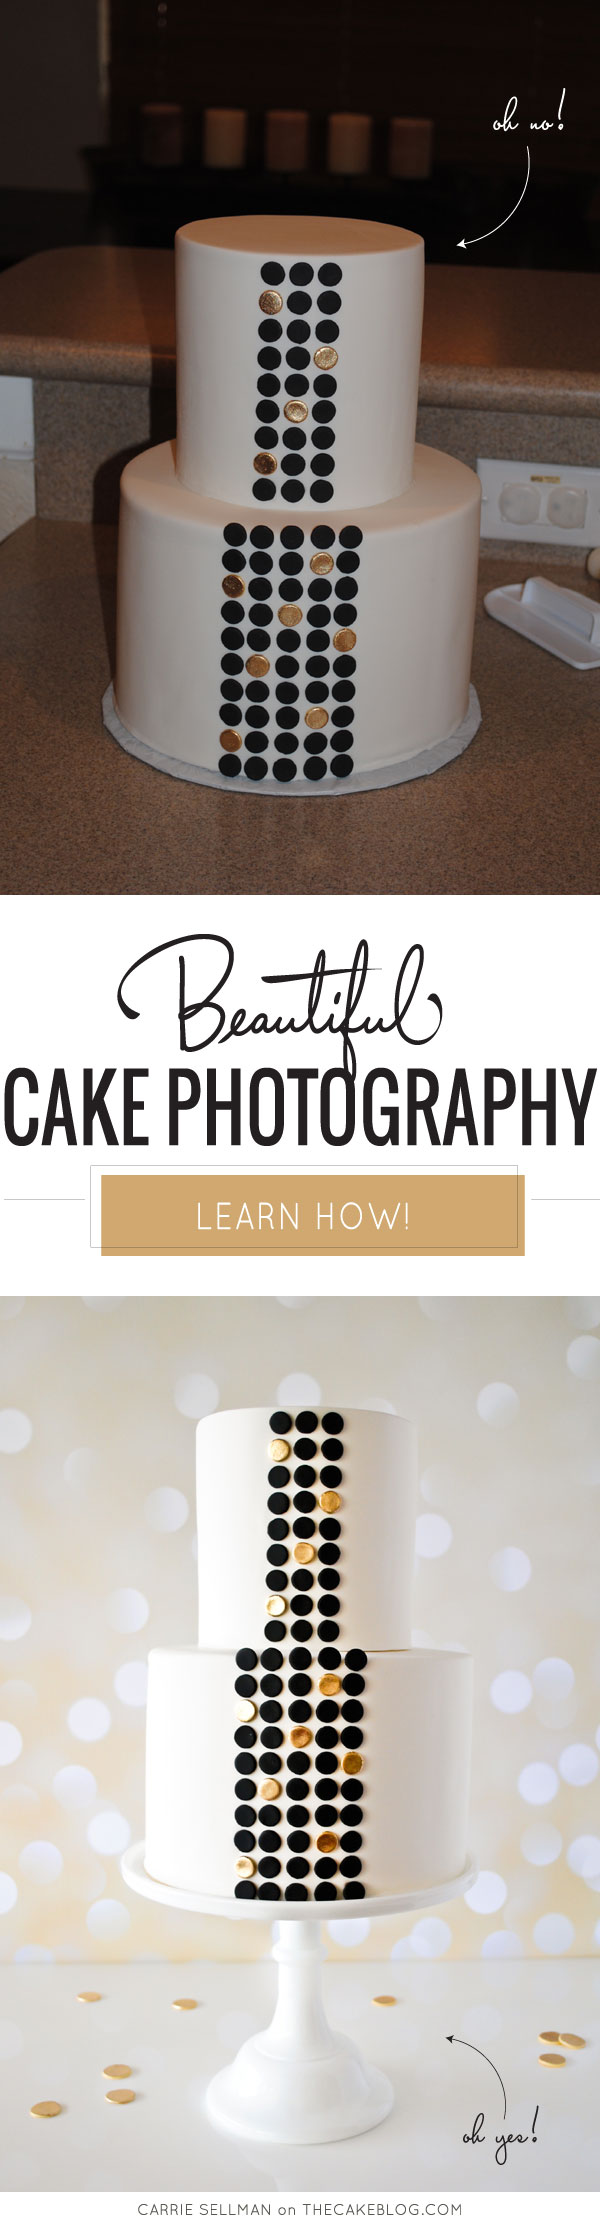 Learn to take professional looking cake photos | Beautiful Cake Photography with Carrie Sellman of TheCakeBlog.com